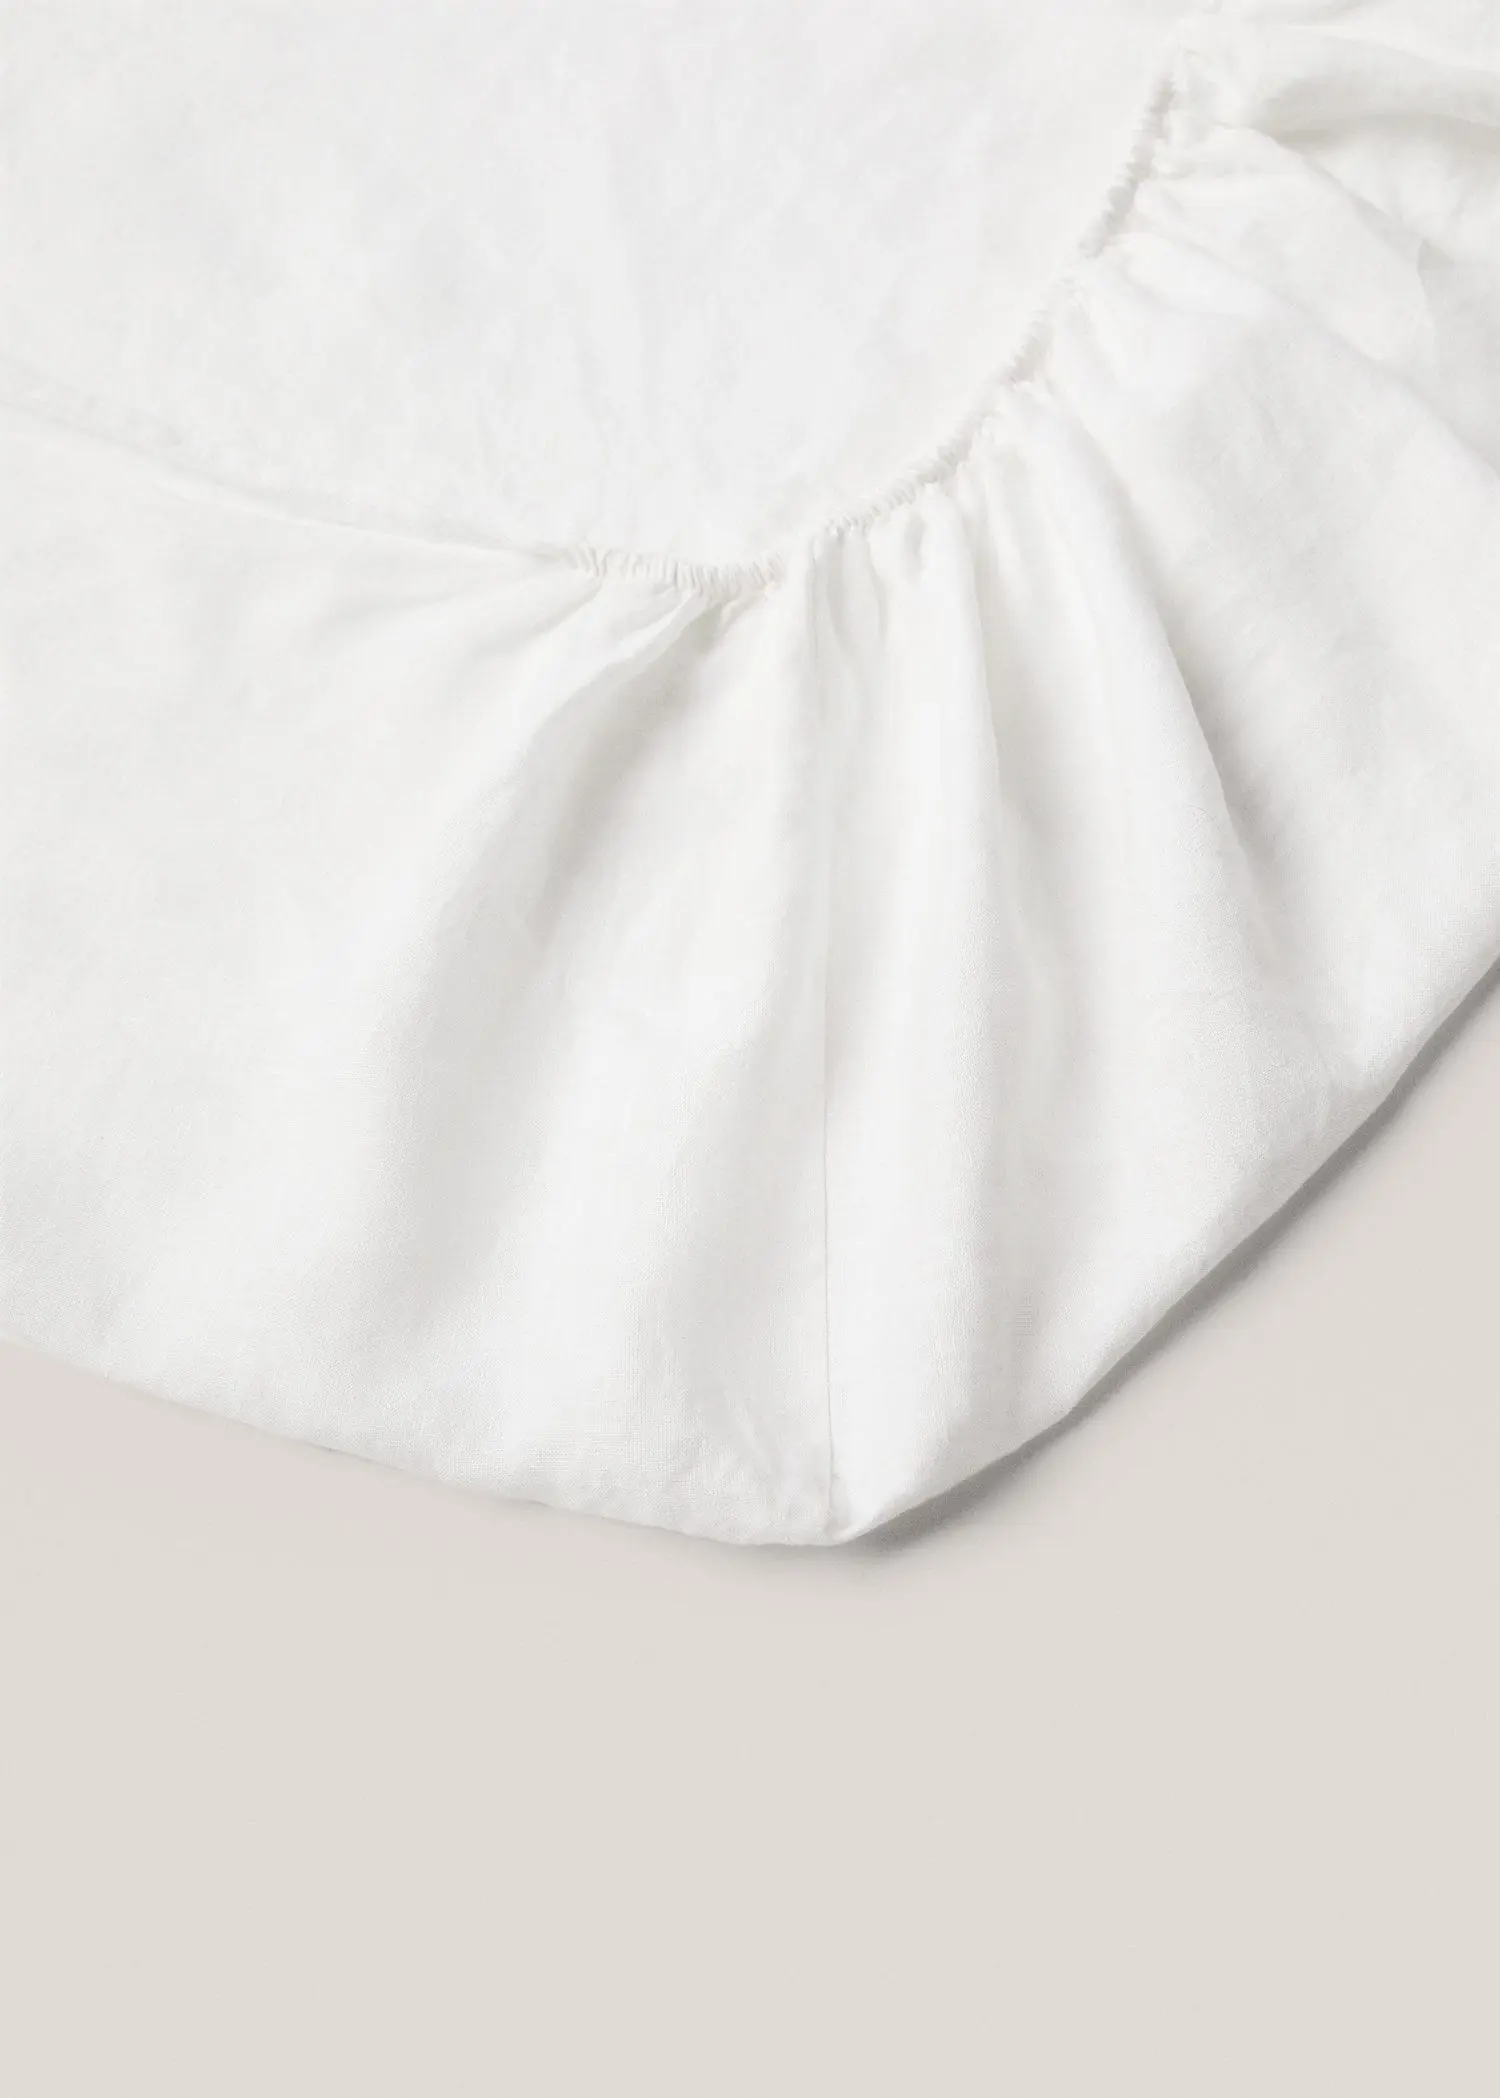 Mango 100% linen fitted sheet Single bed. 2